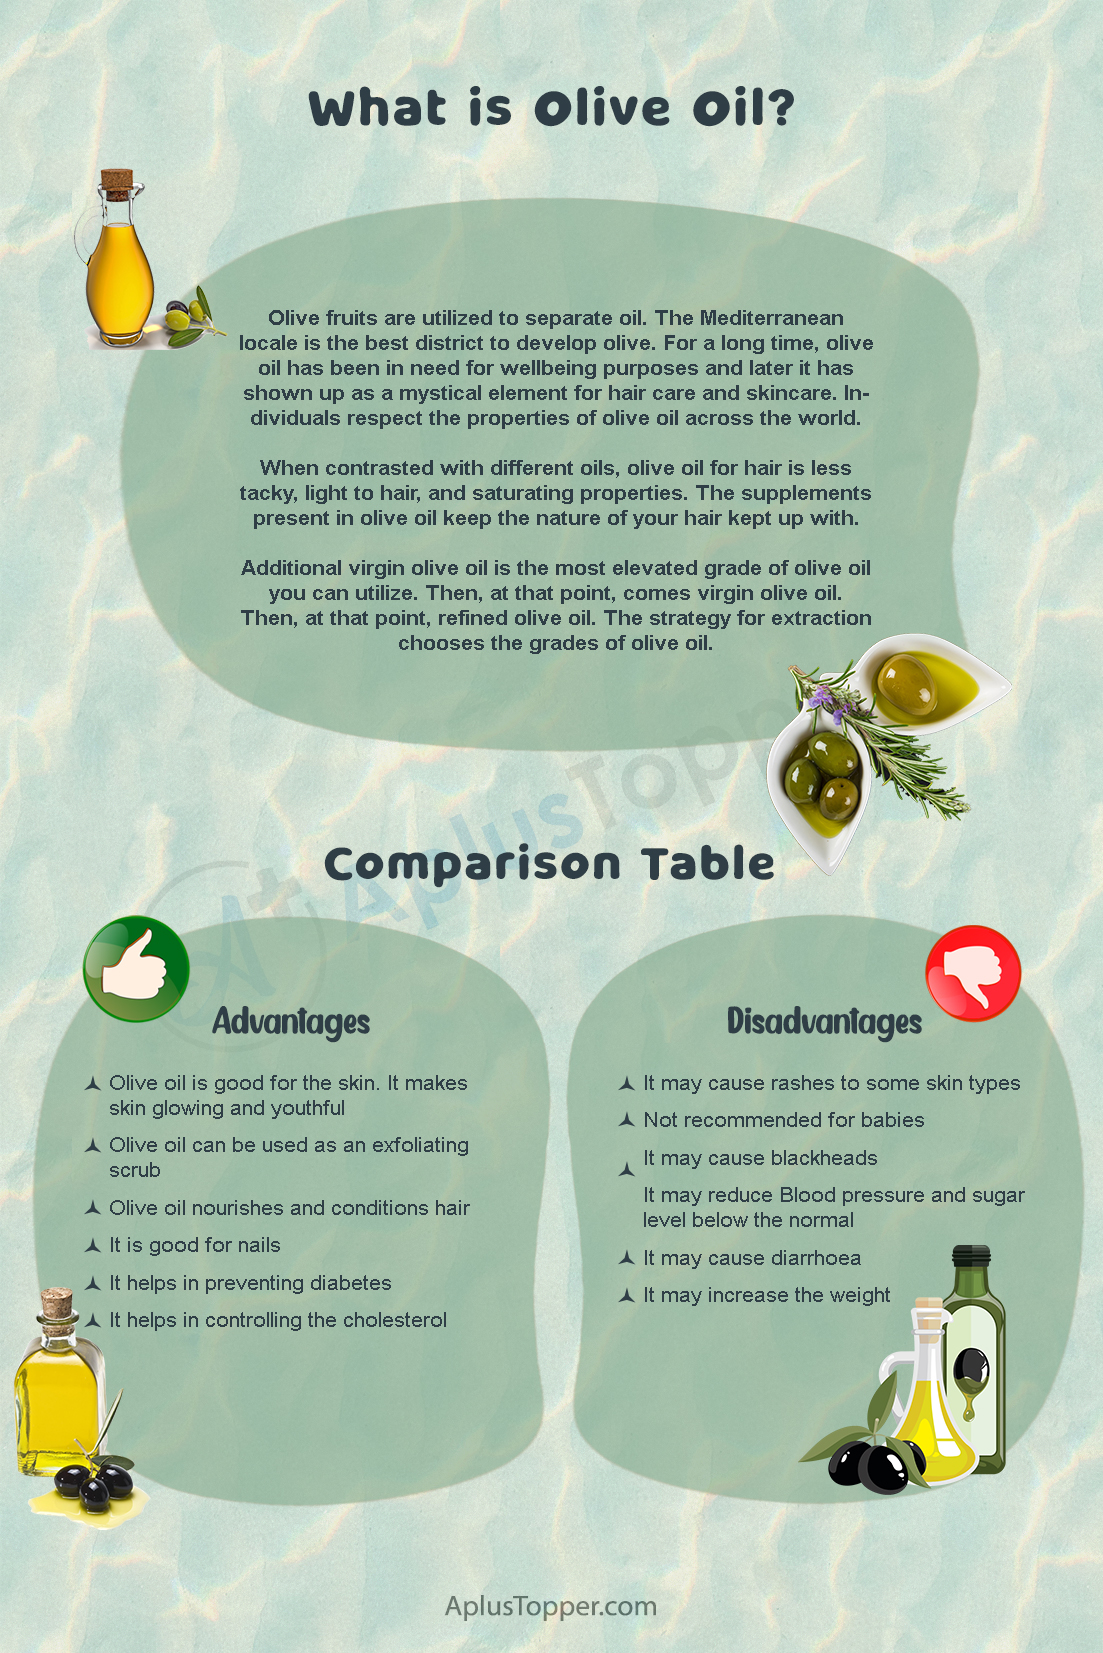 Advantages and Disadvantages of Olive Oil 1